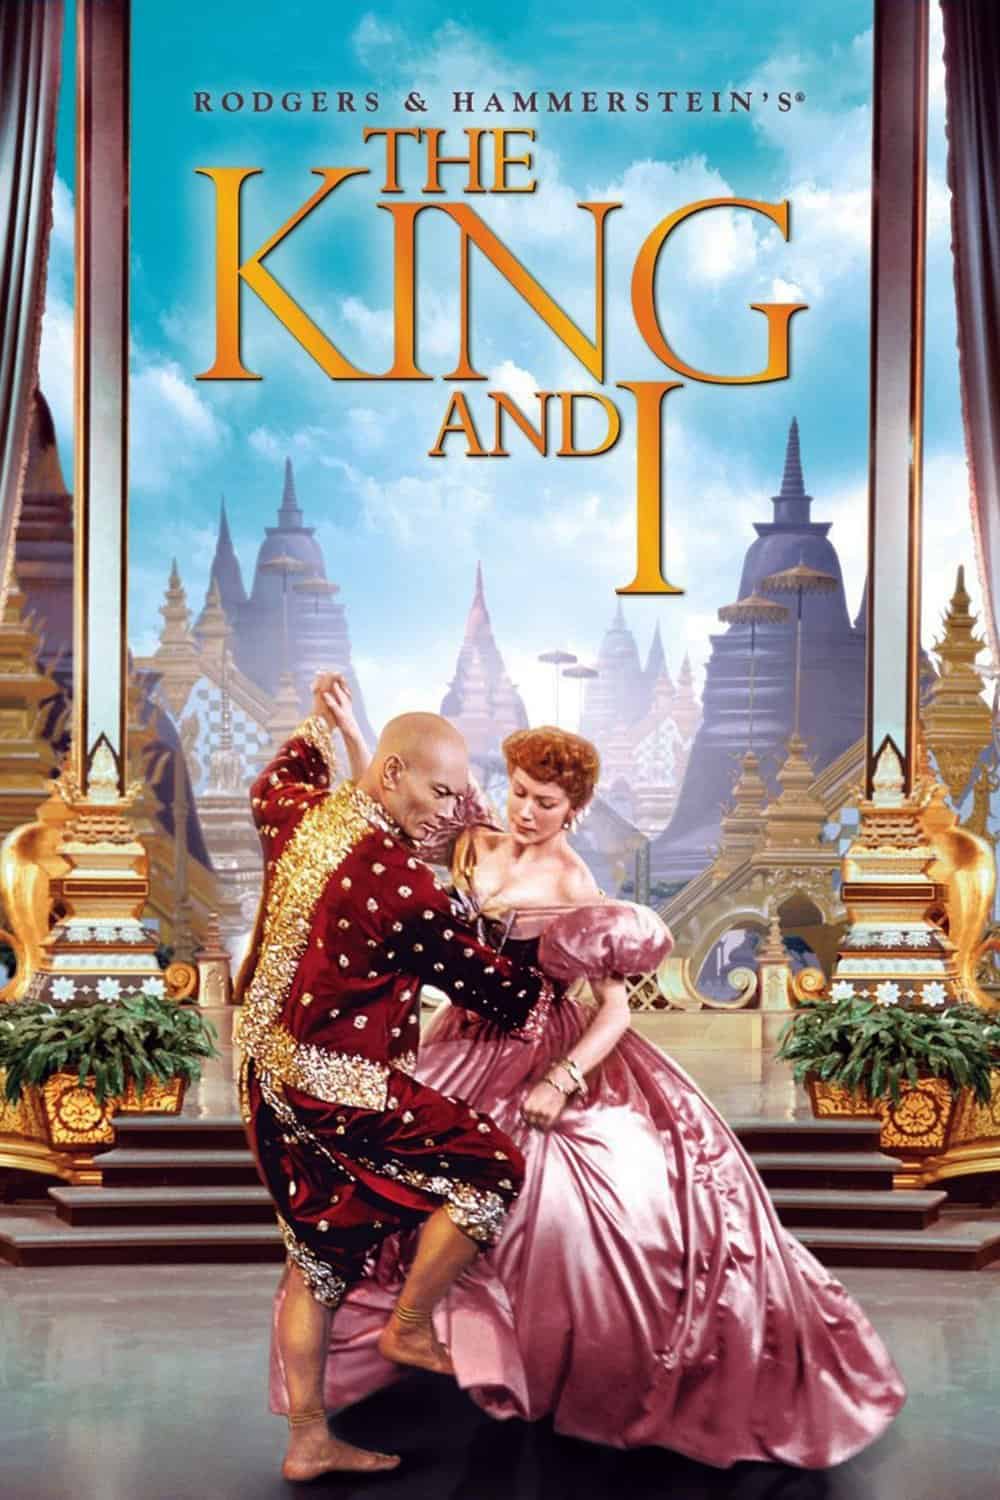 The King and I, 1956 